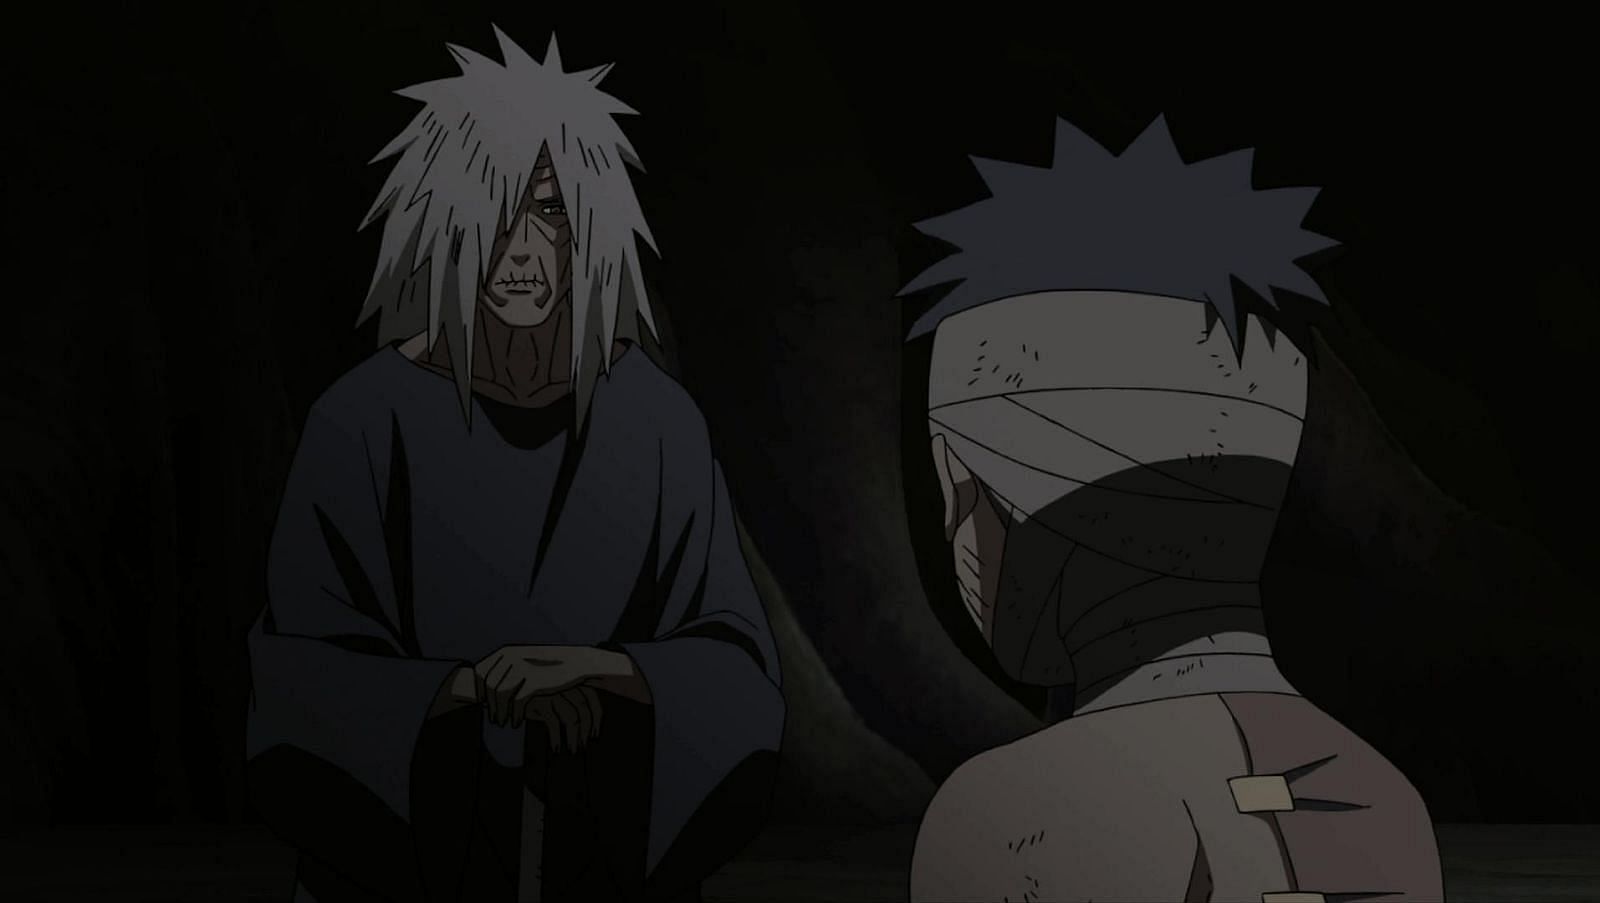 Obito after being saved by Madara Uchiha in Naruto (Image via Studio Pierrot)